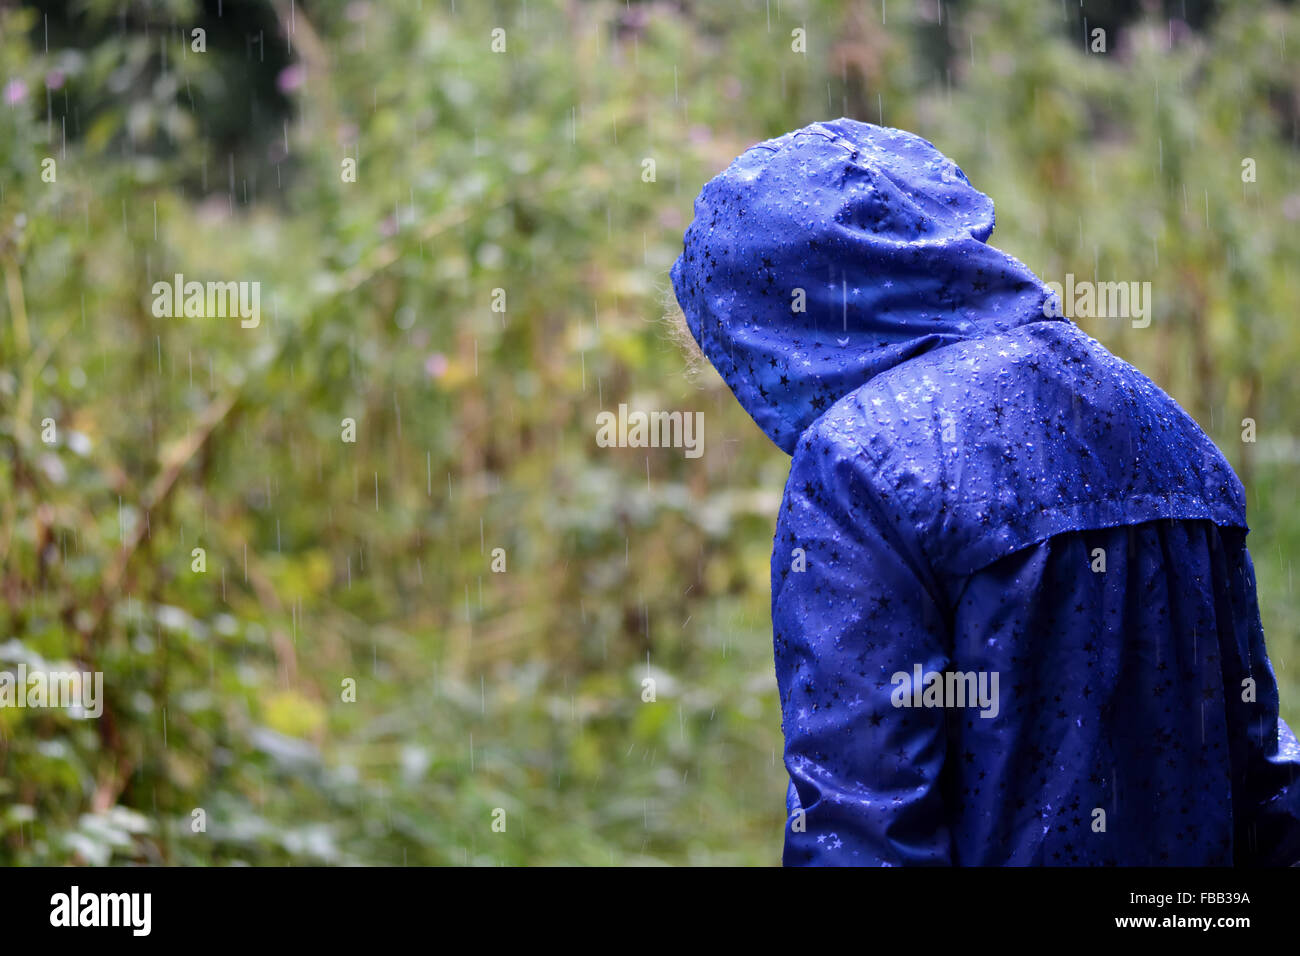 Child in a blue waterproof coat in the rain. A girl stands with her head bowed in heavy rain, in a bright blue raincoat Stock Photo